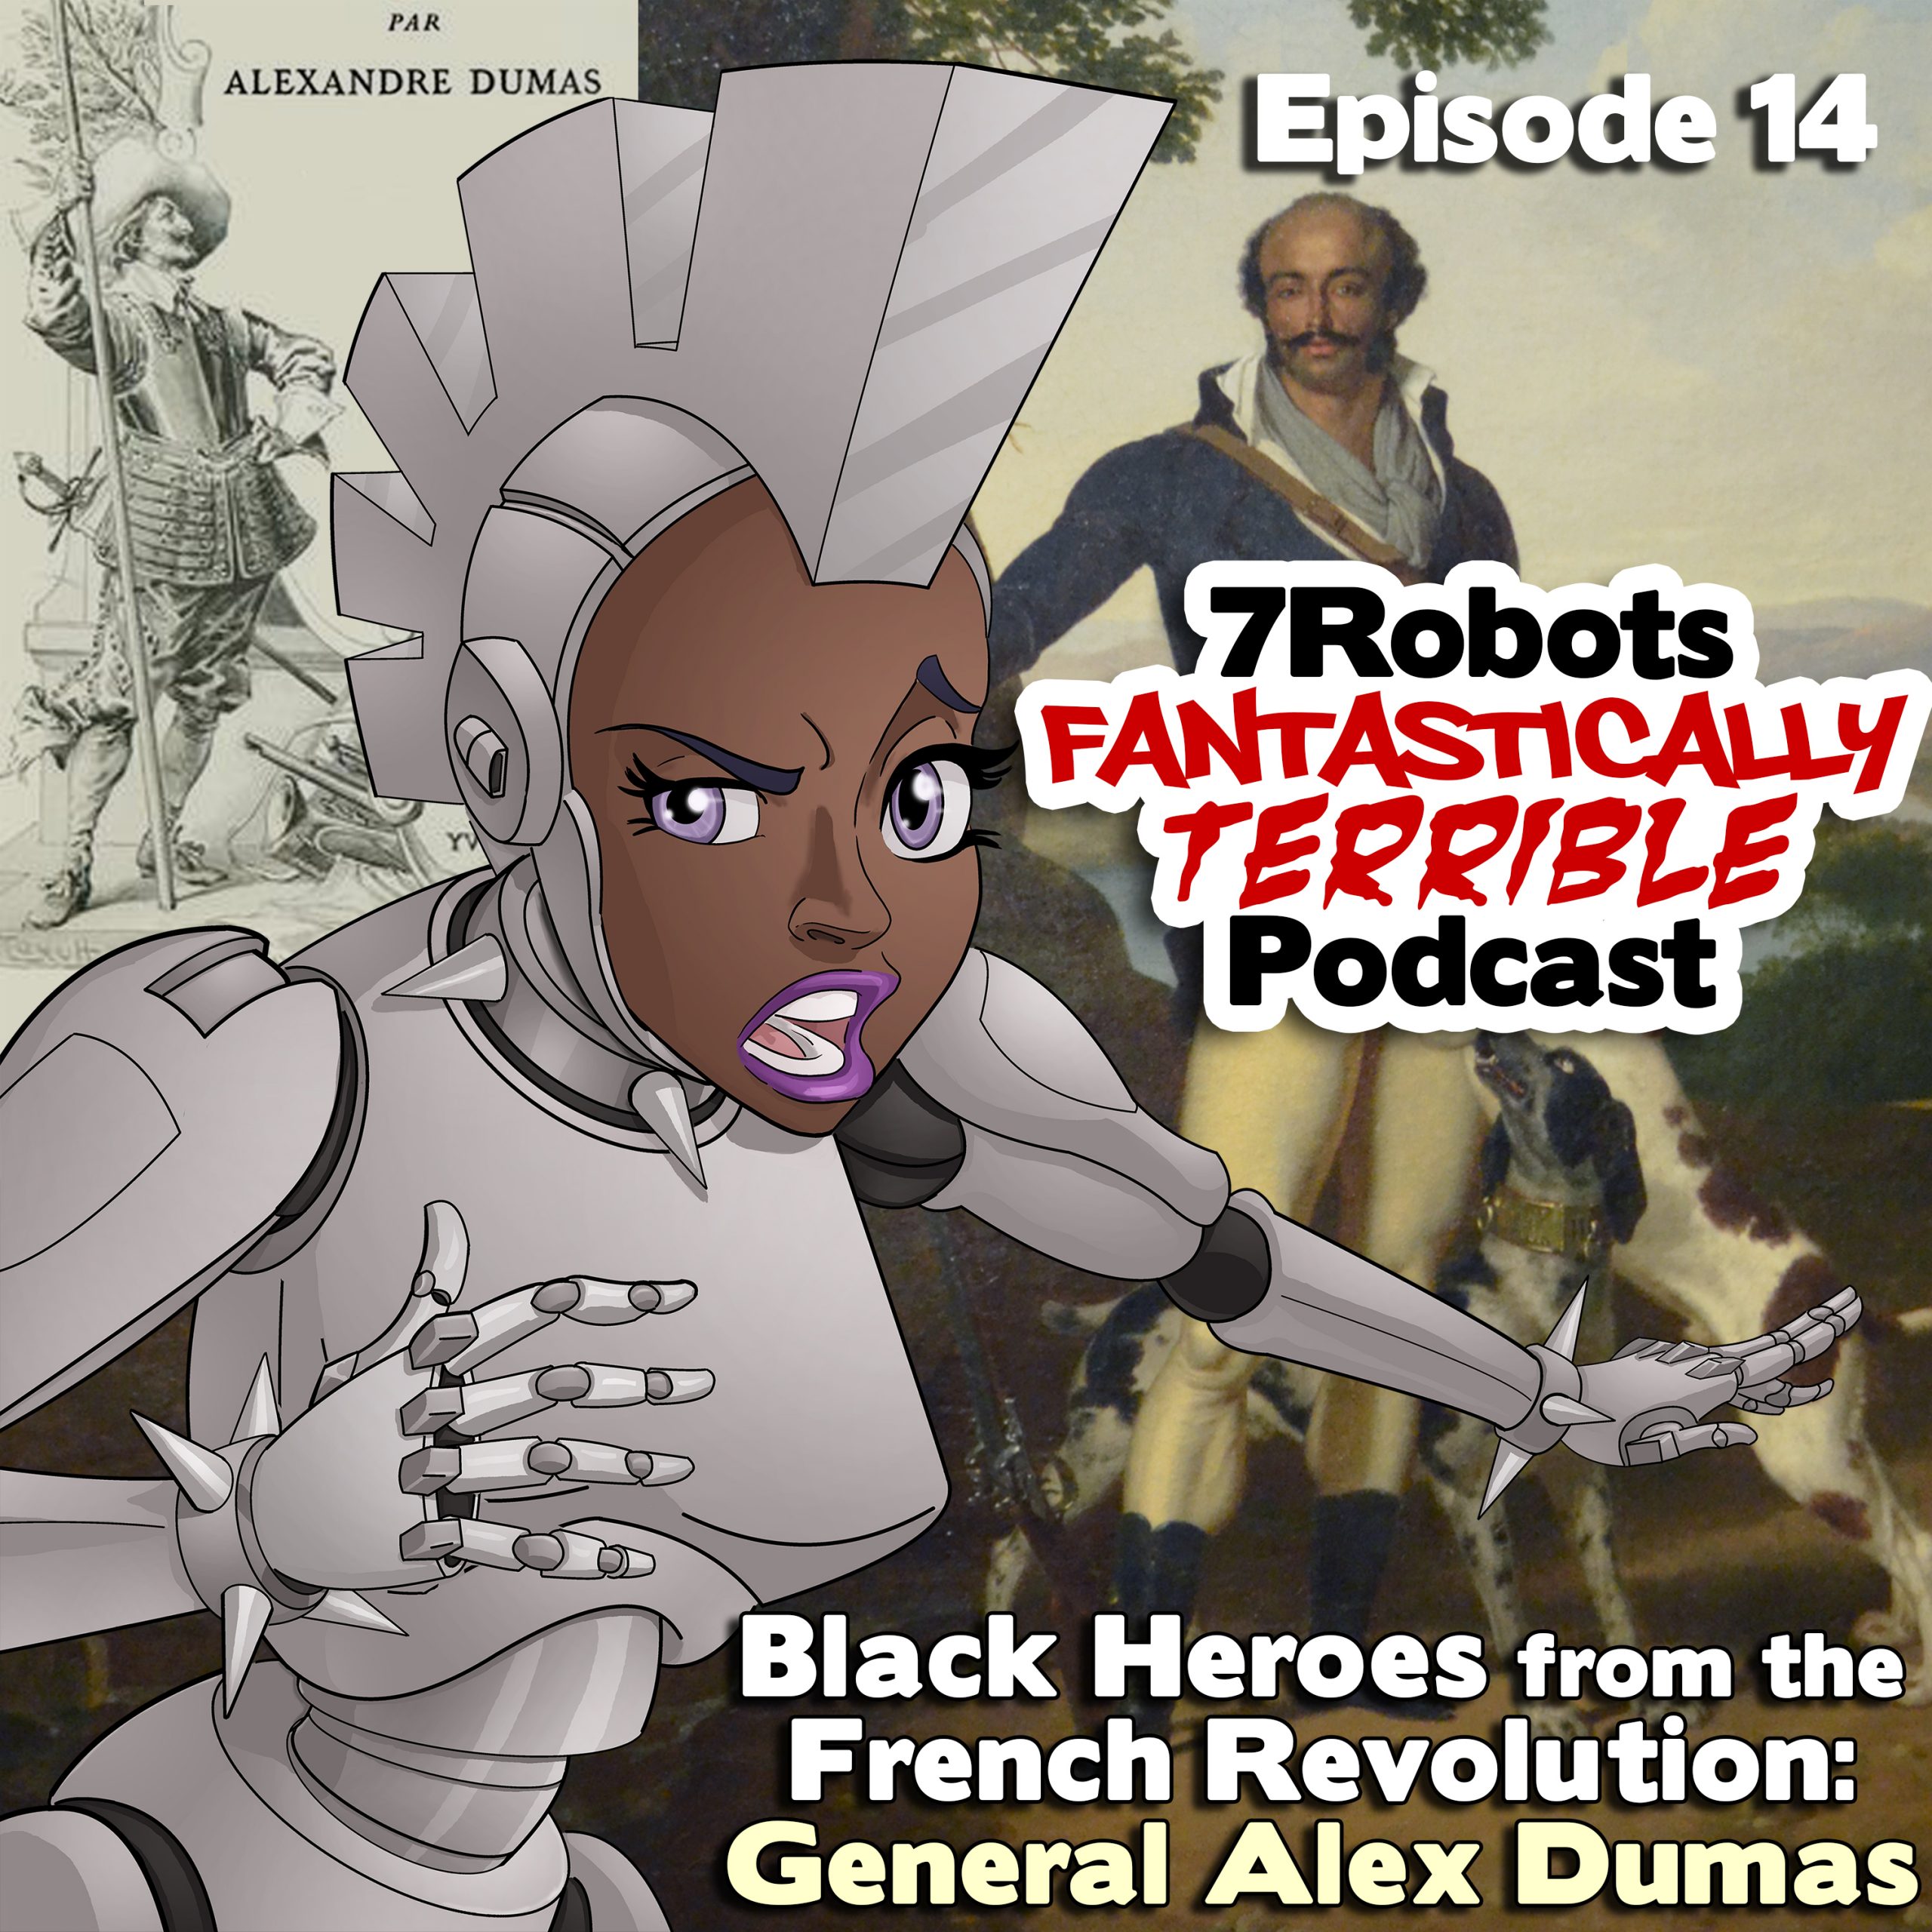 7 Robots Fantastically Terrible Podcast Ep14: Black Heroes from the French Revolution: General Alex Dumas